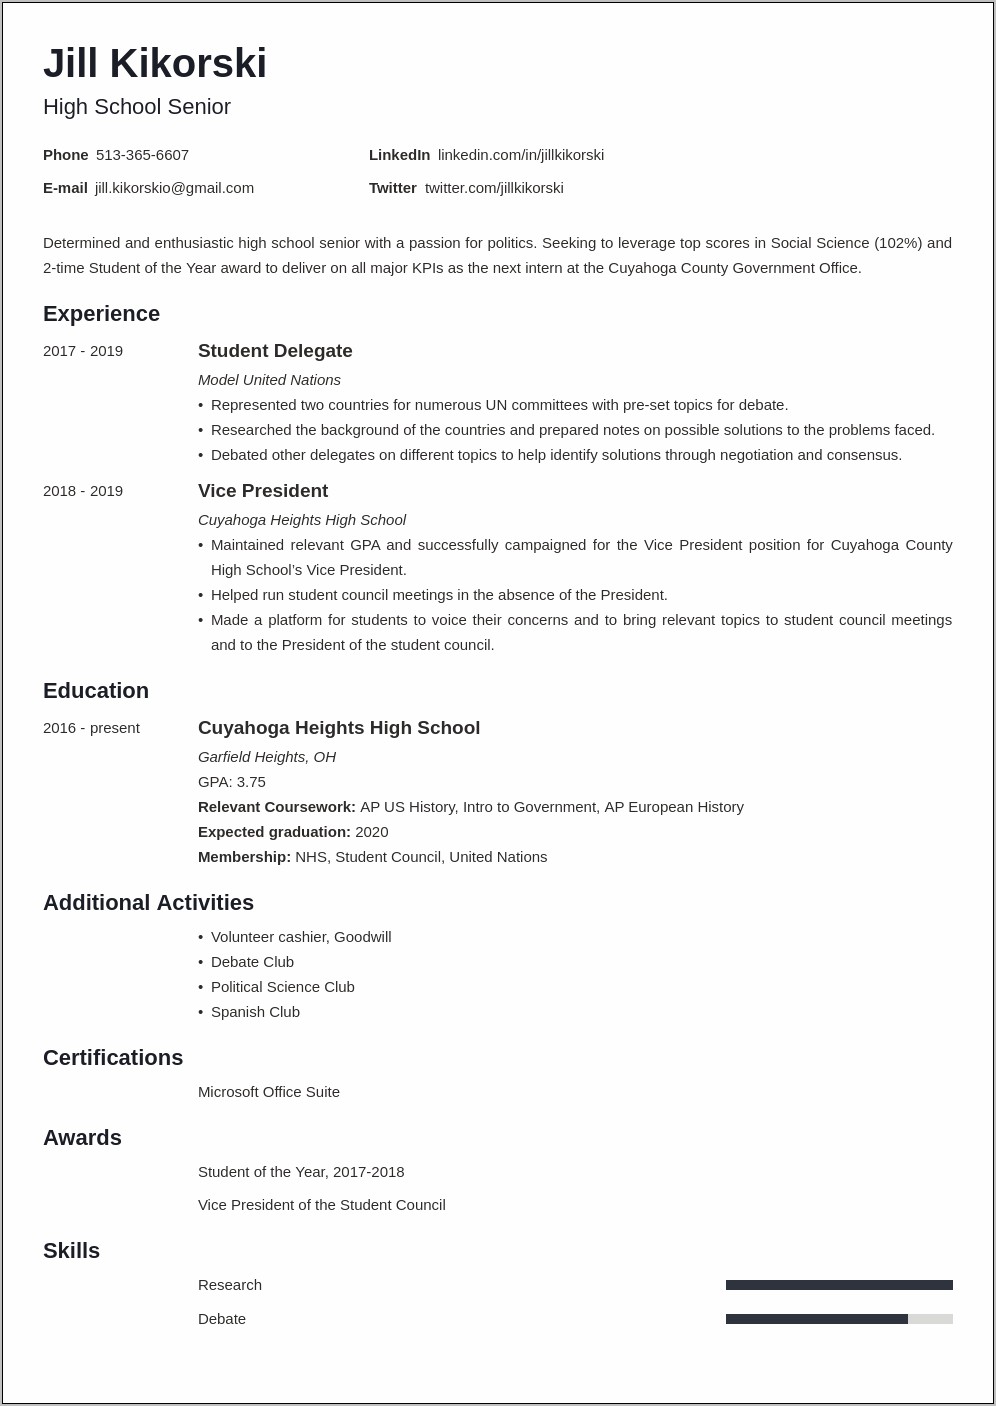 Resume Bullet Points For High School Students